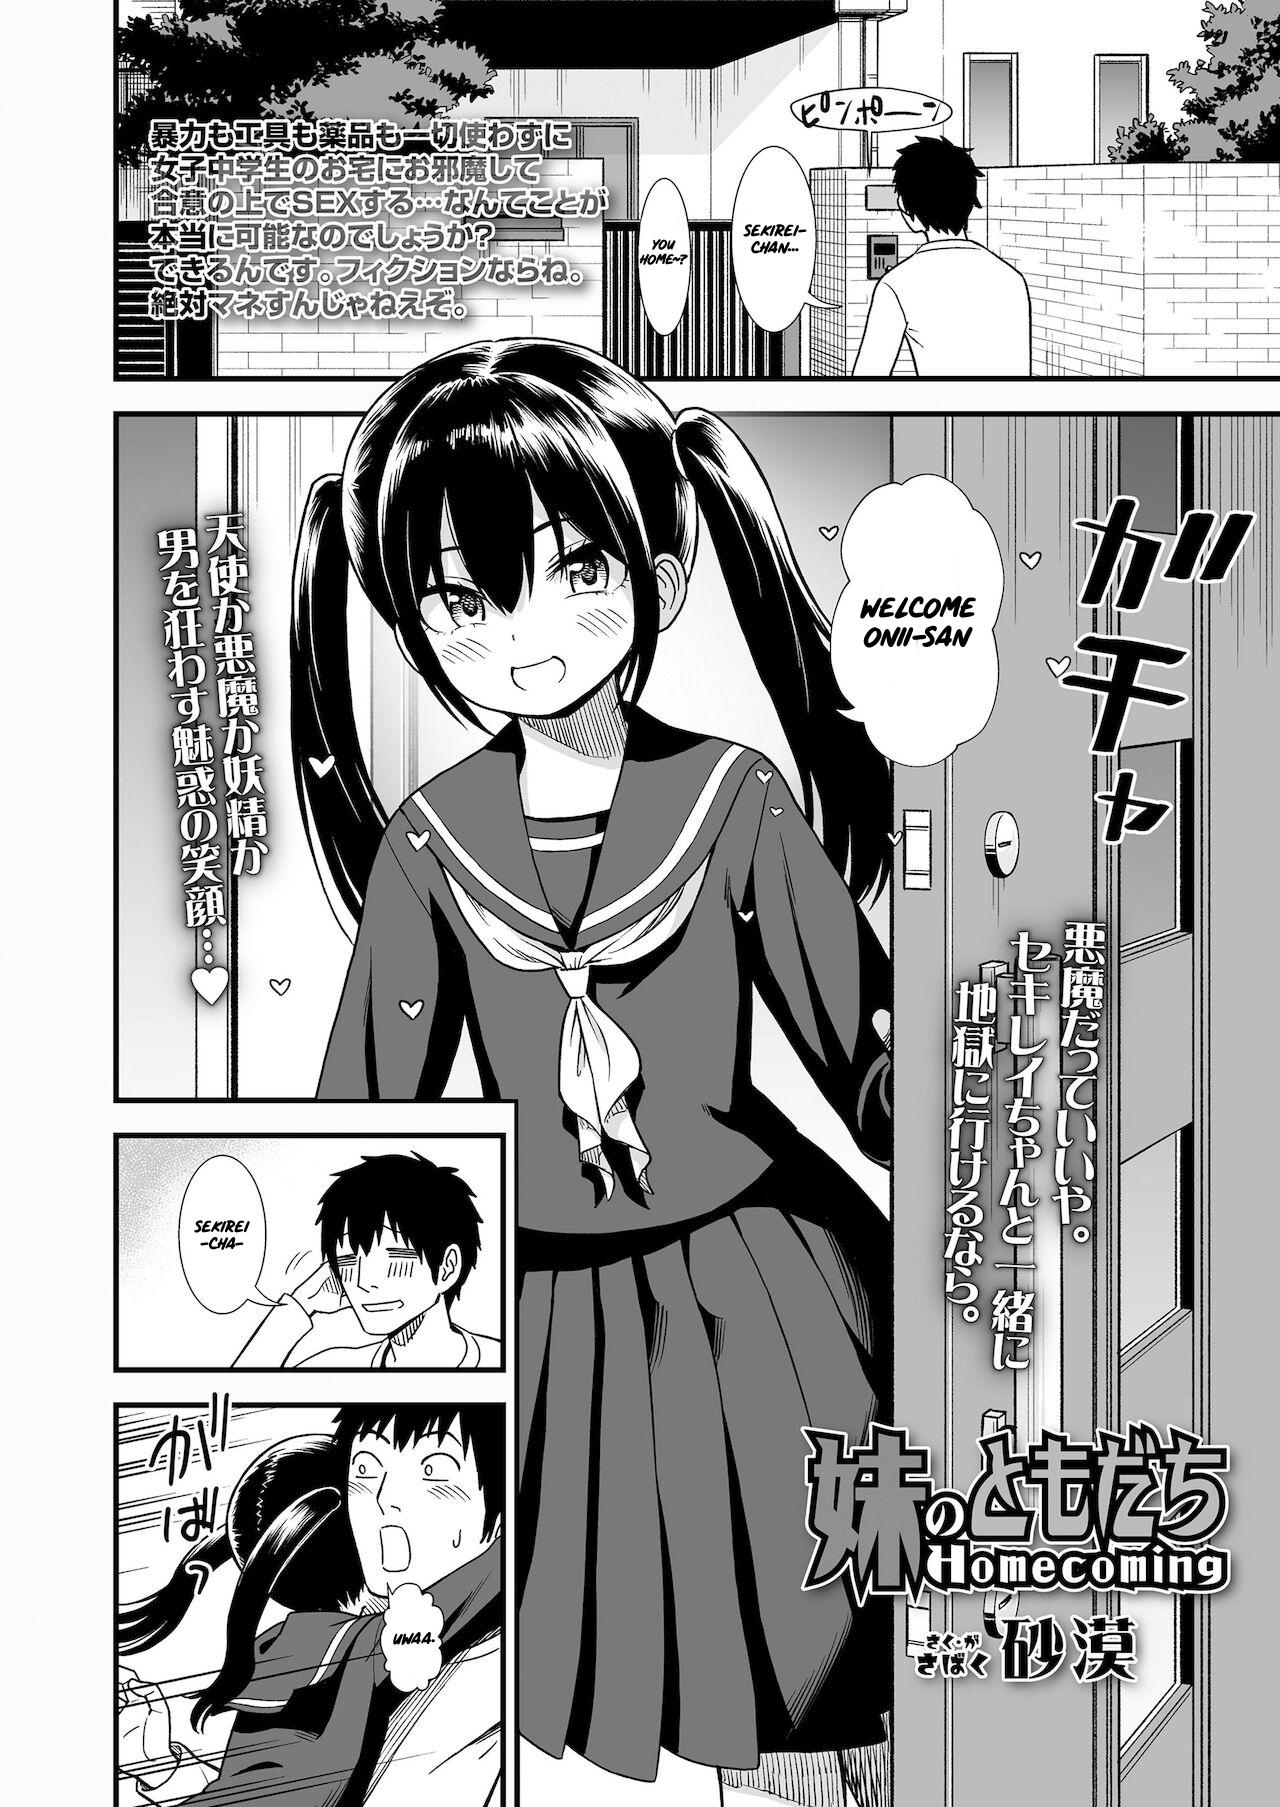 Sex Imouto no Tomodachi Homecoming | My Little Sister's Friend Homecoming Thailand - Page 2